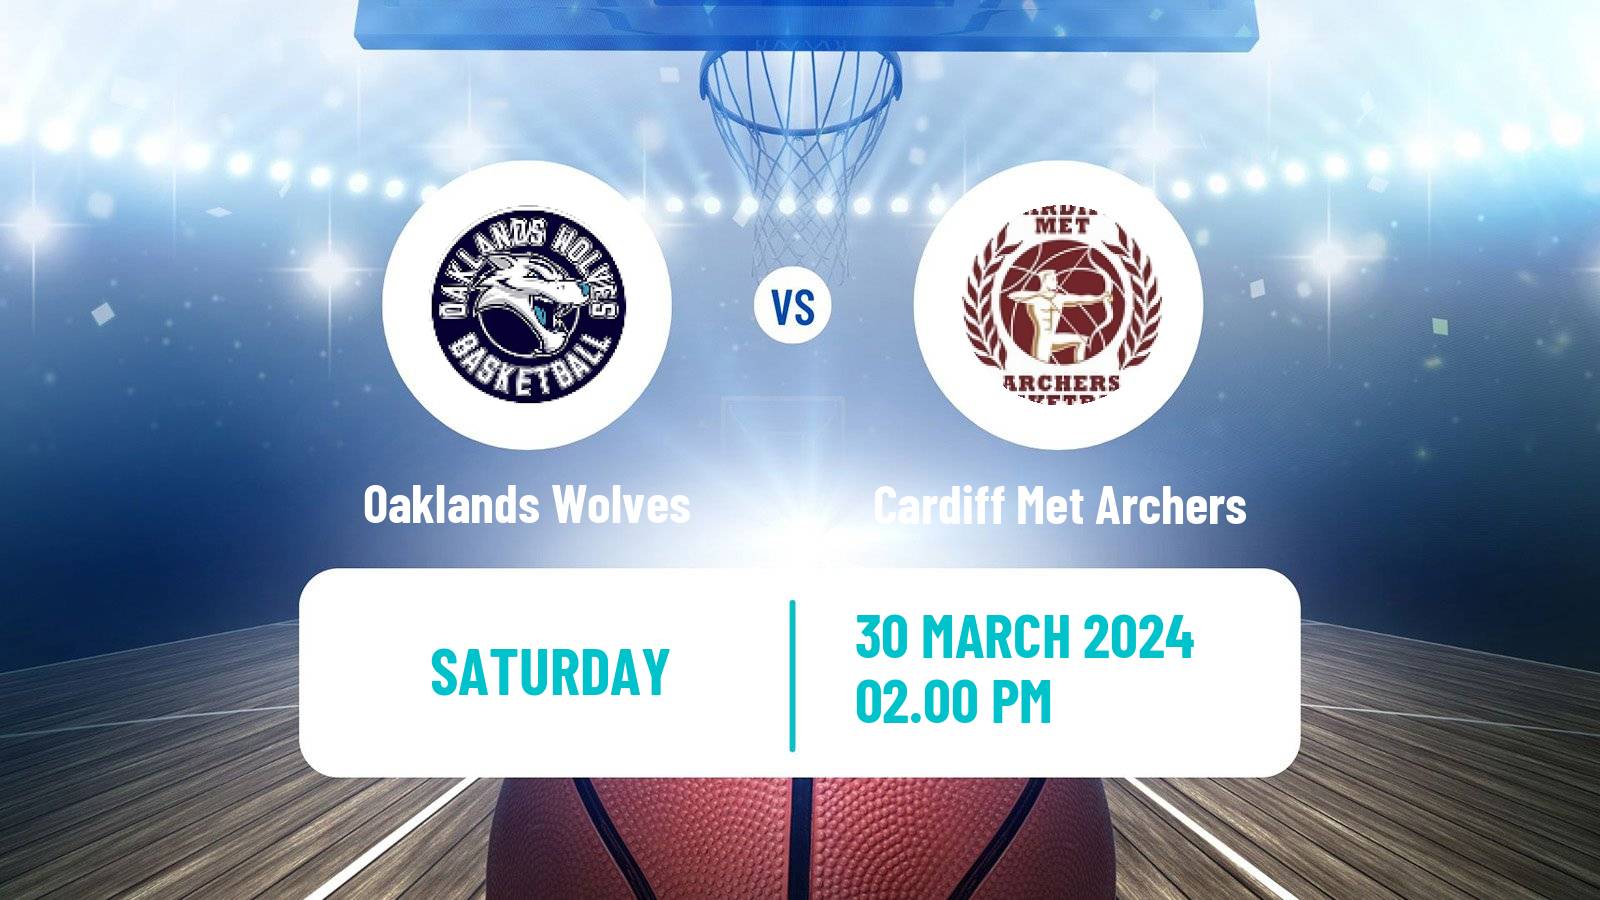 Basketball British WBBL Oaklands Wolves - Cardiff Met Archers